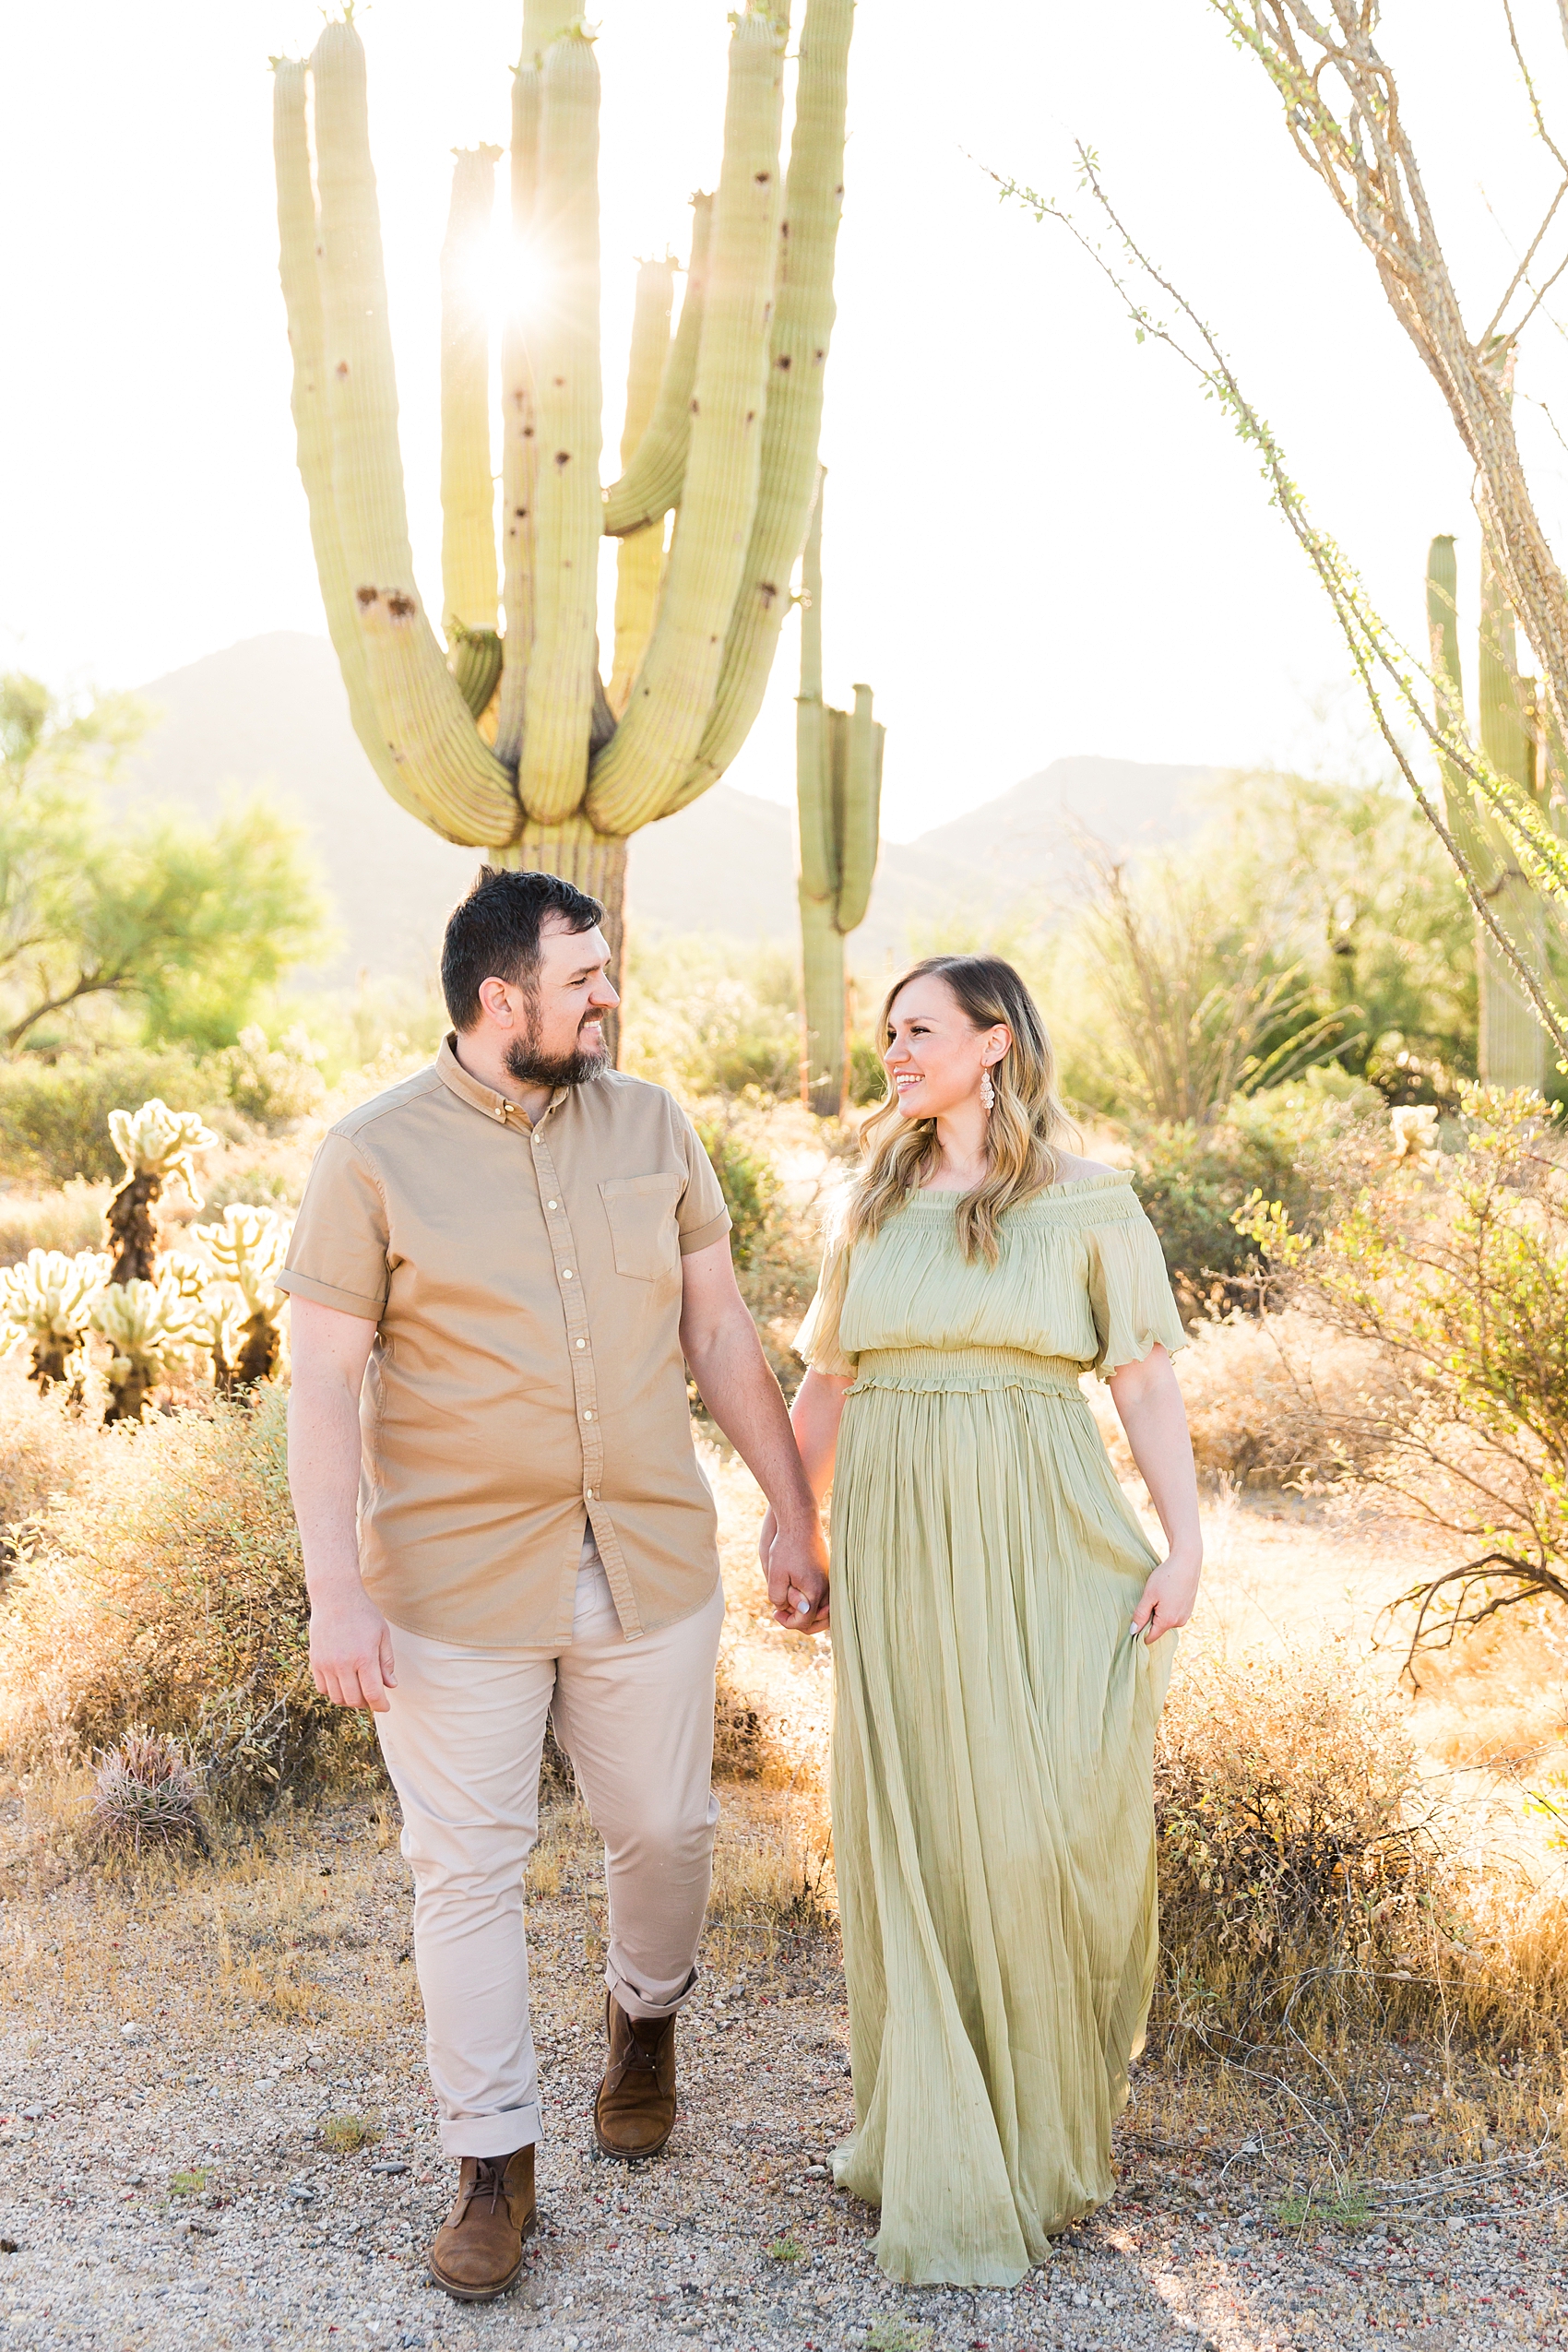 Leah Hope Photography | Scottsdale Phoenix Arizona | Desert Landscape Cactus Mountains Scenery | Sunrise Natural Light | What to Wear | How to Pose | Family Poses | Styling Fashion for Pictures | Family Photos 